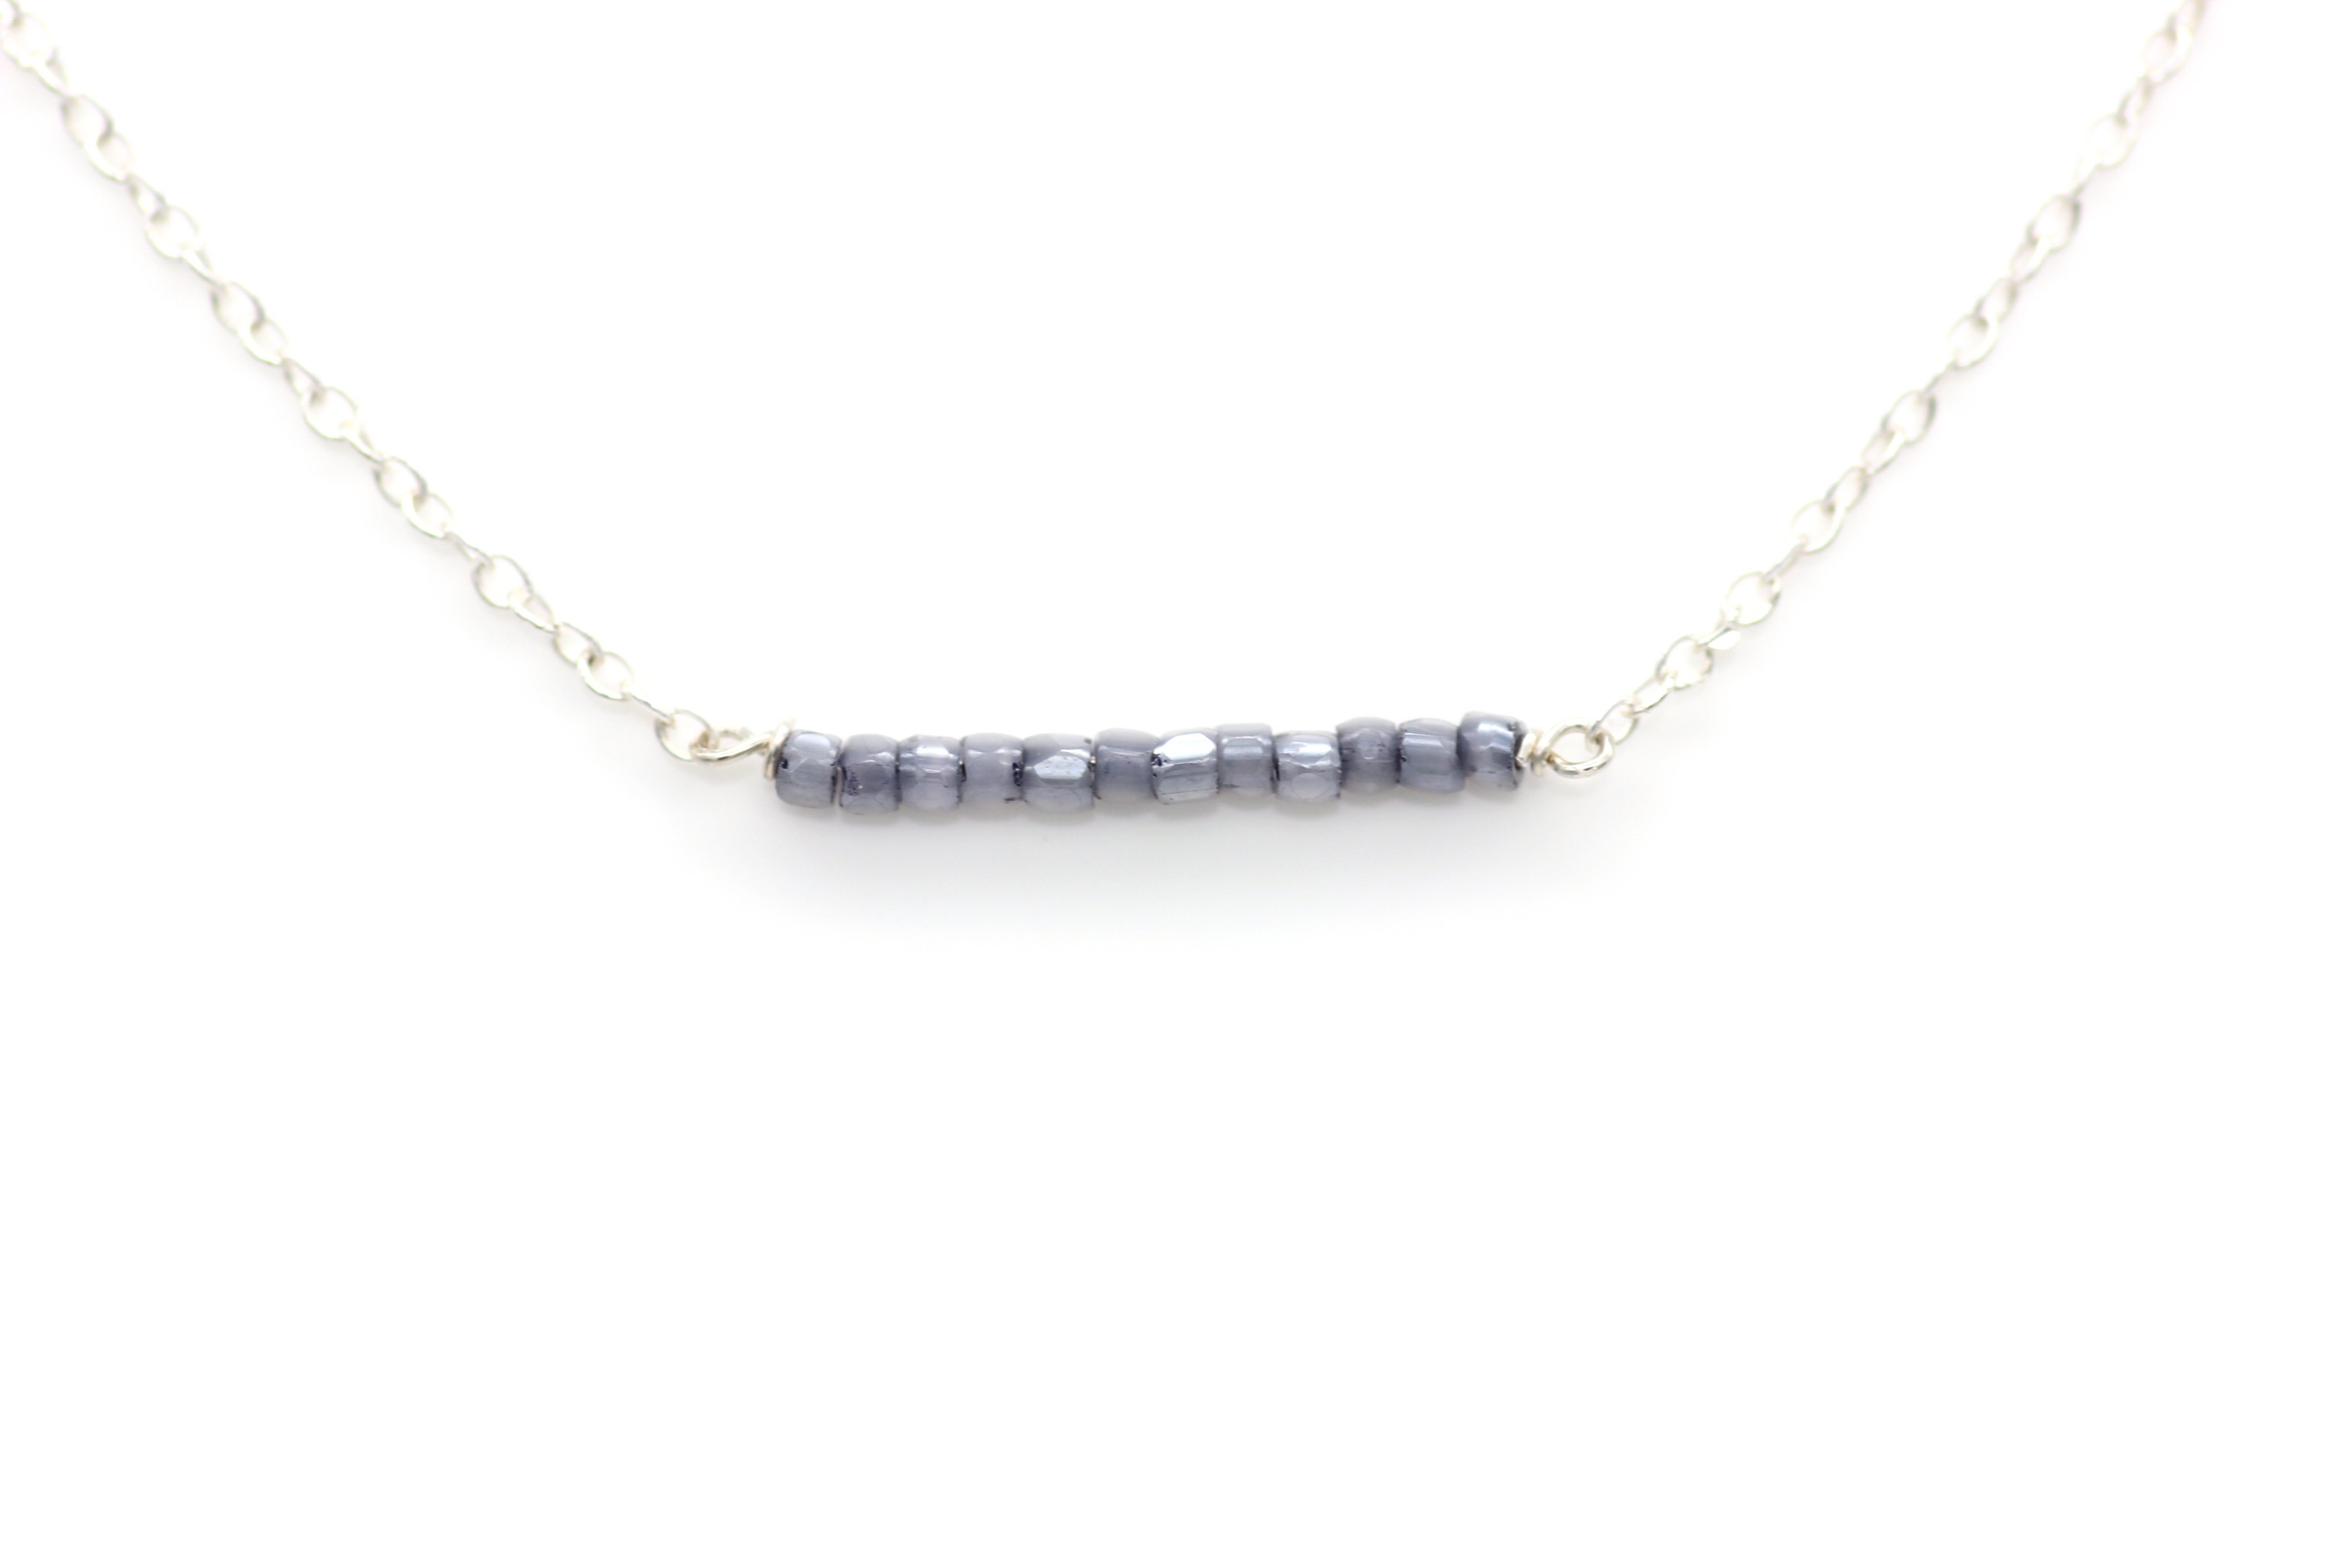 Flow Necklace - Silver